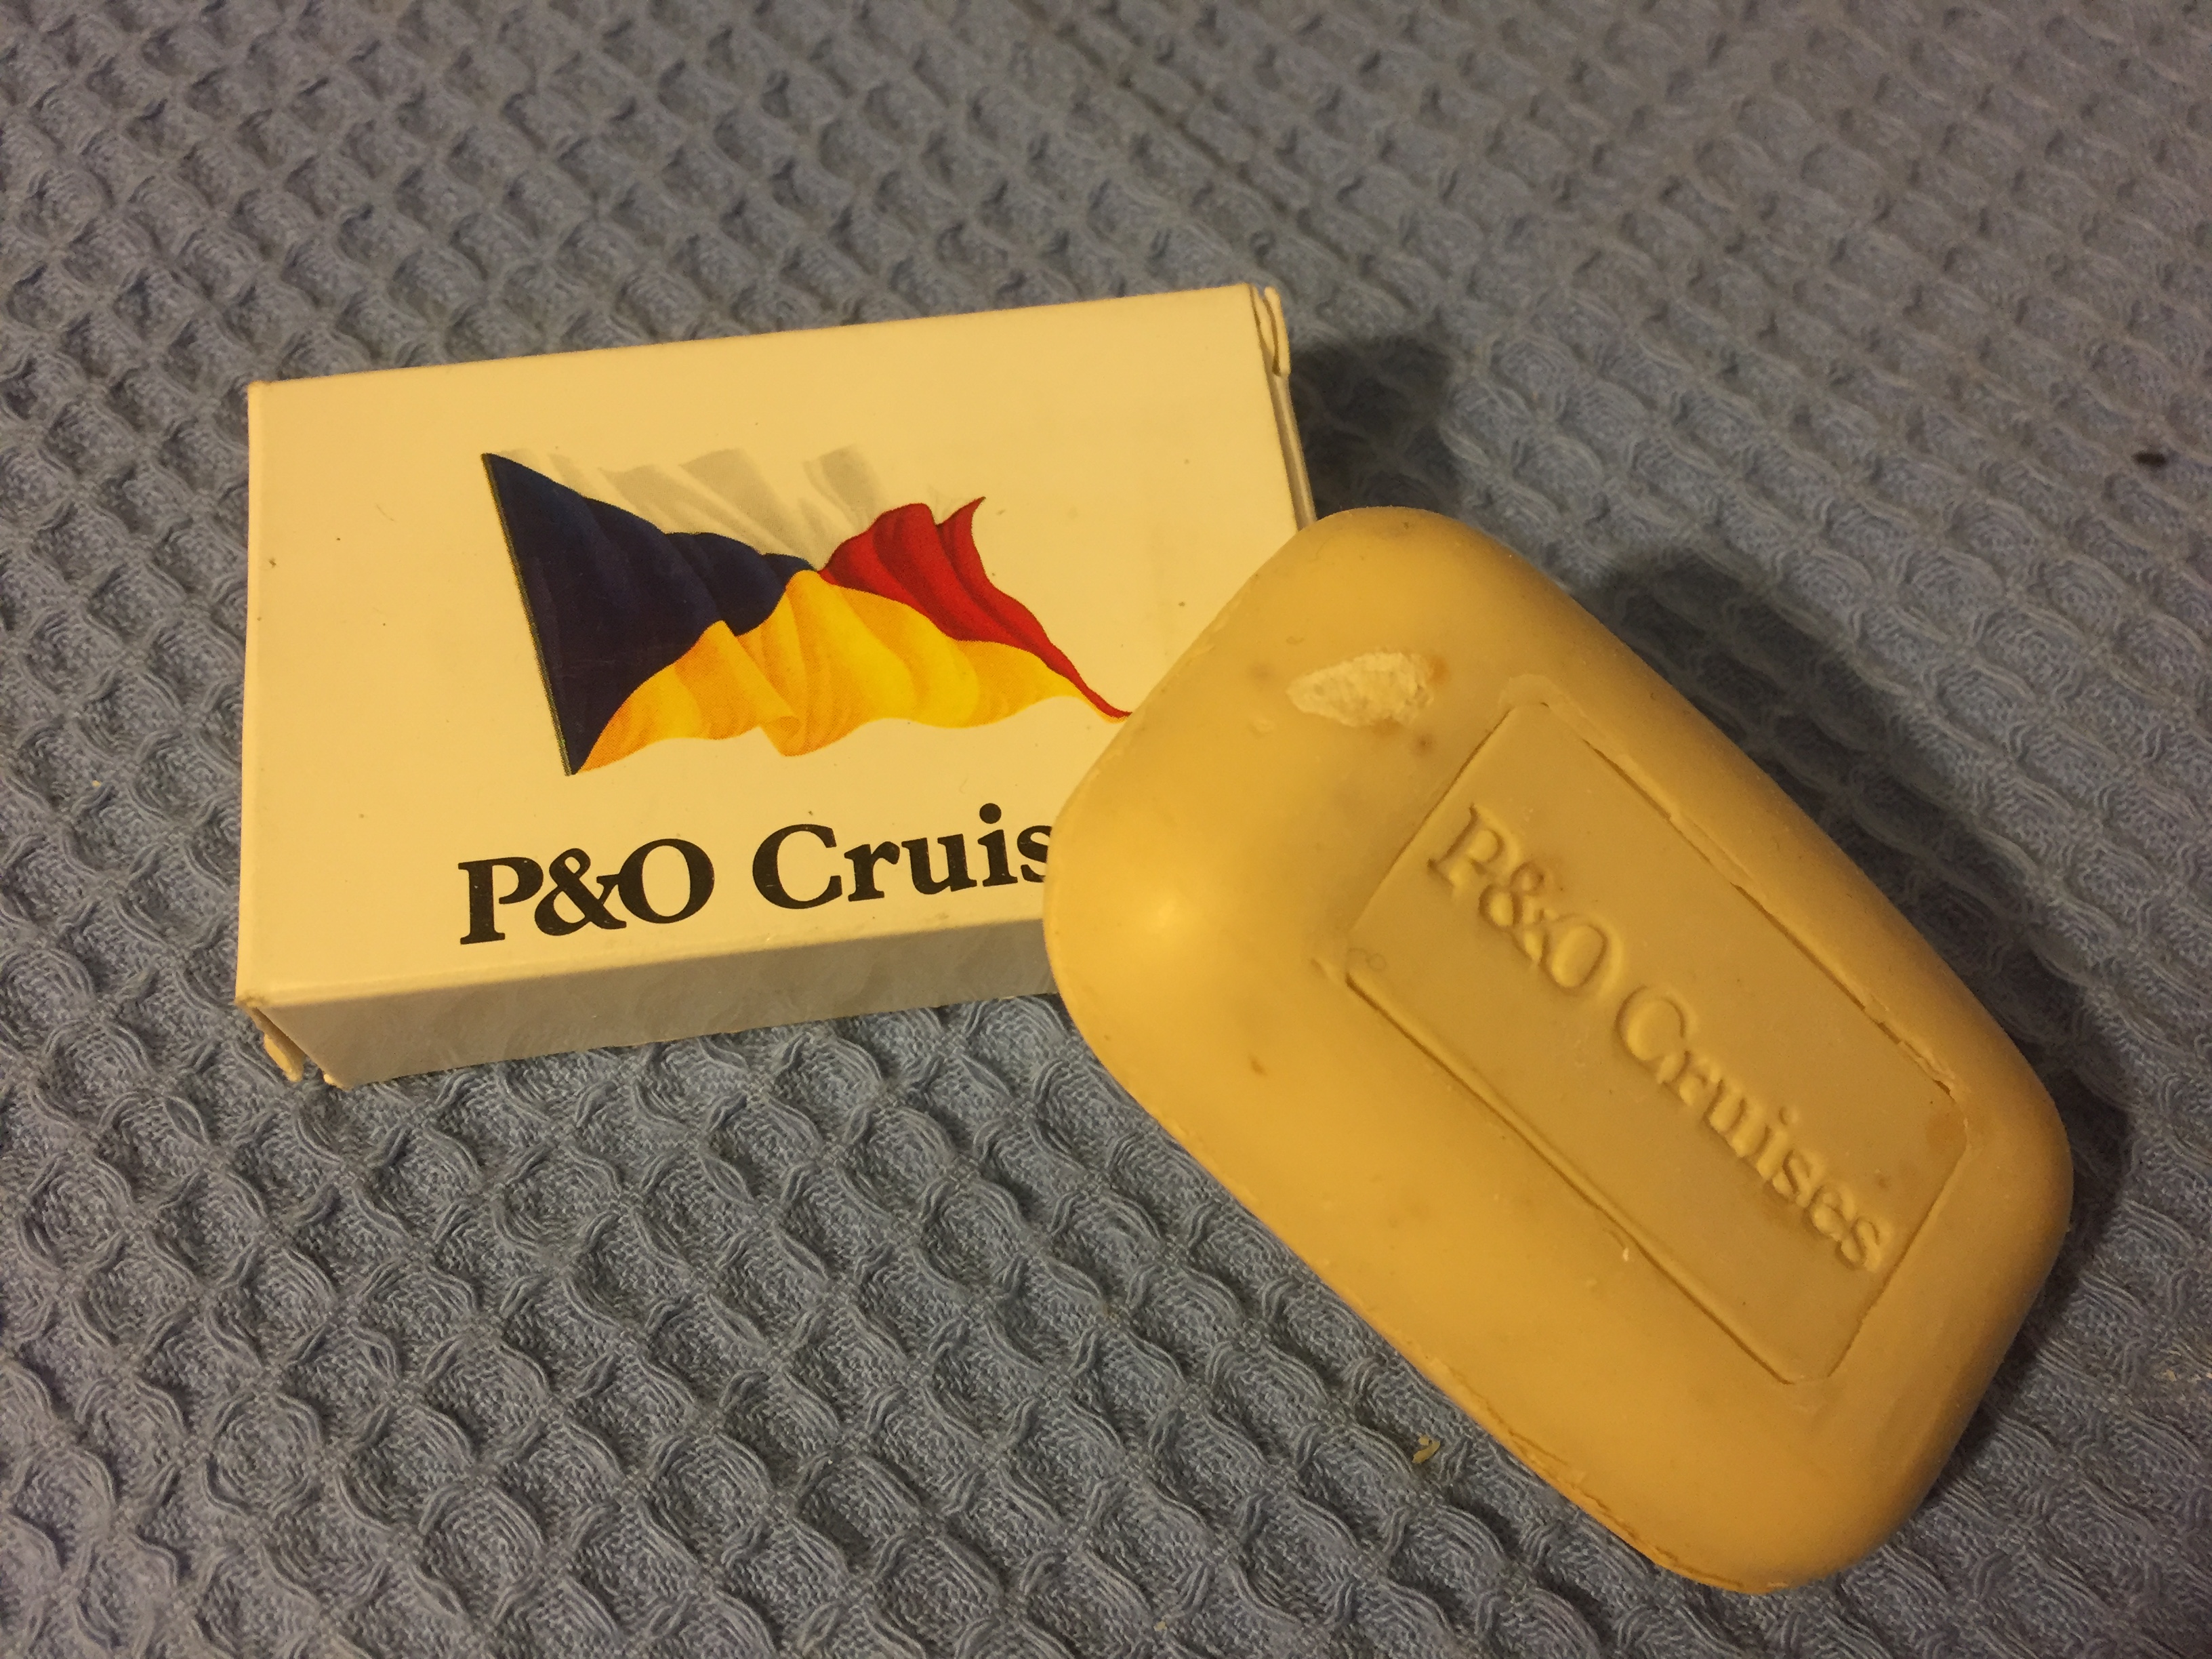 FROM THE 1960's AN UNUSED P&O CRUISES SOAP IN ORIGINAL BOX